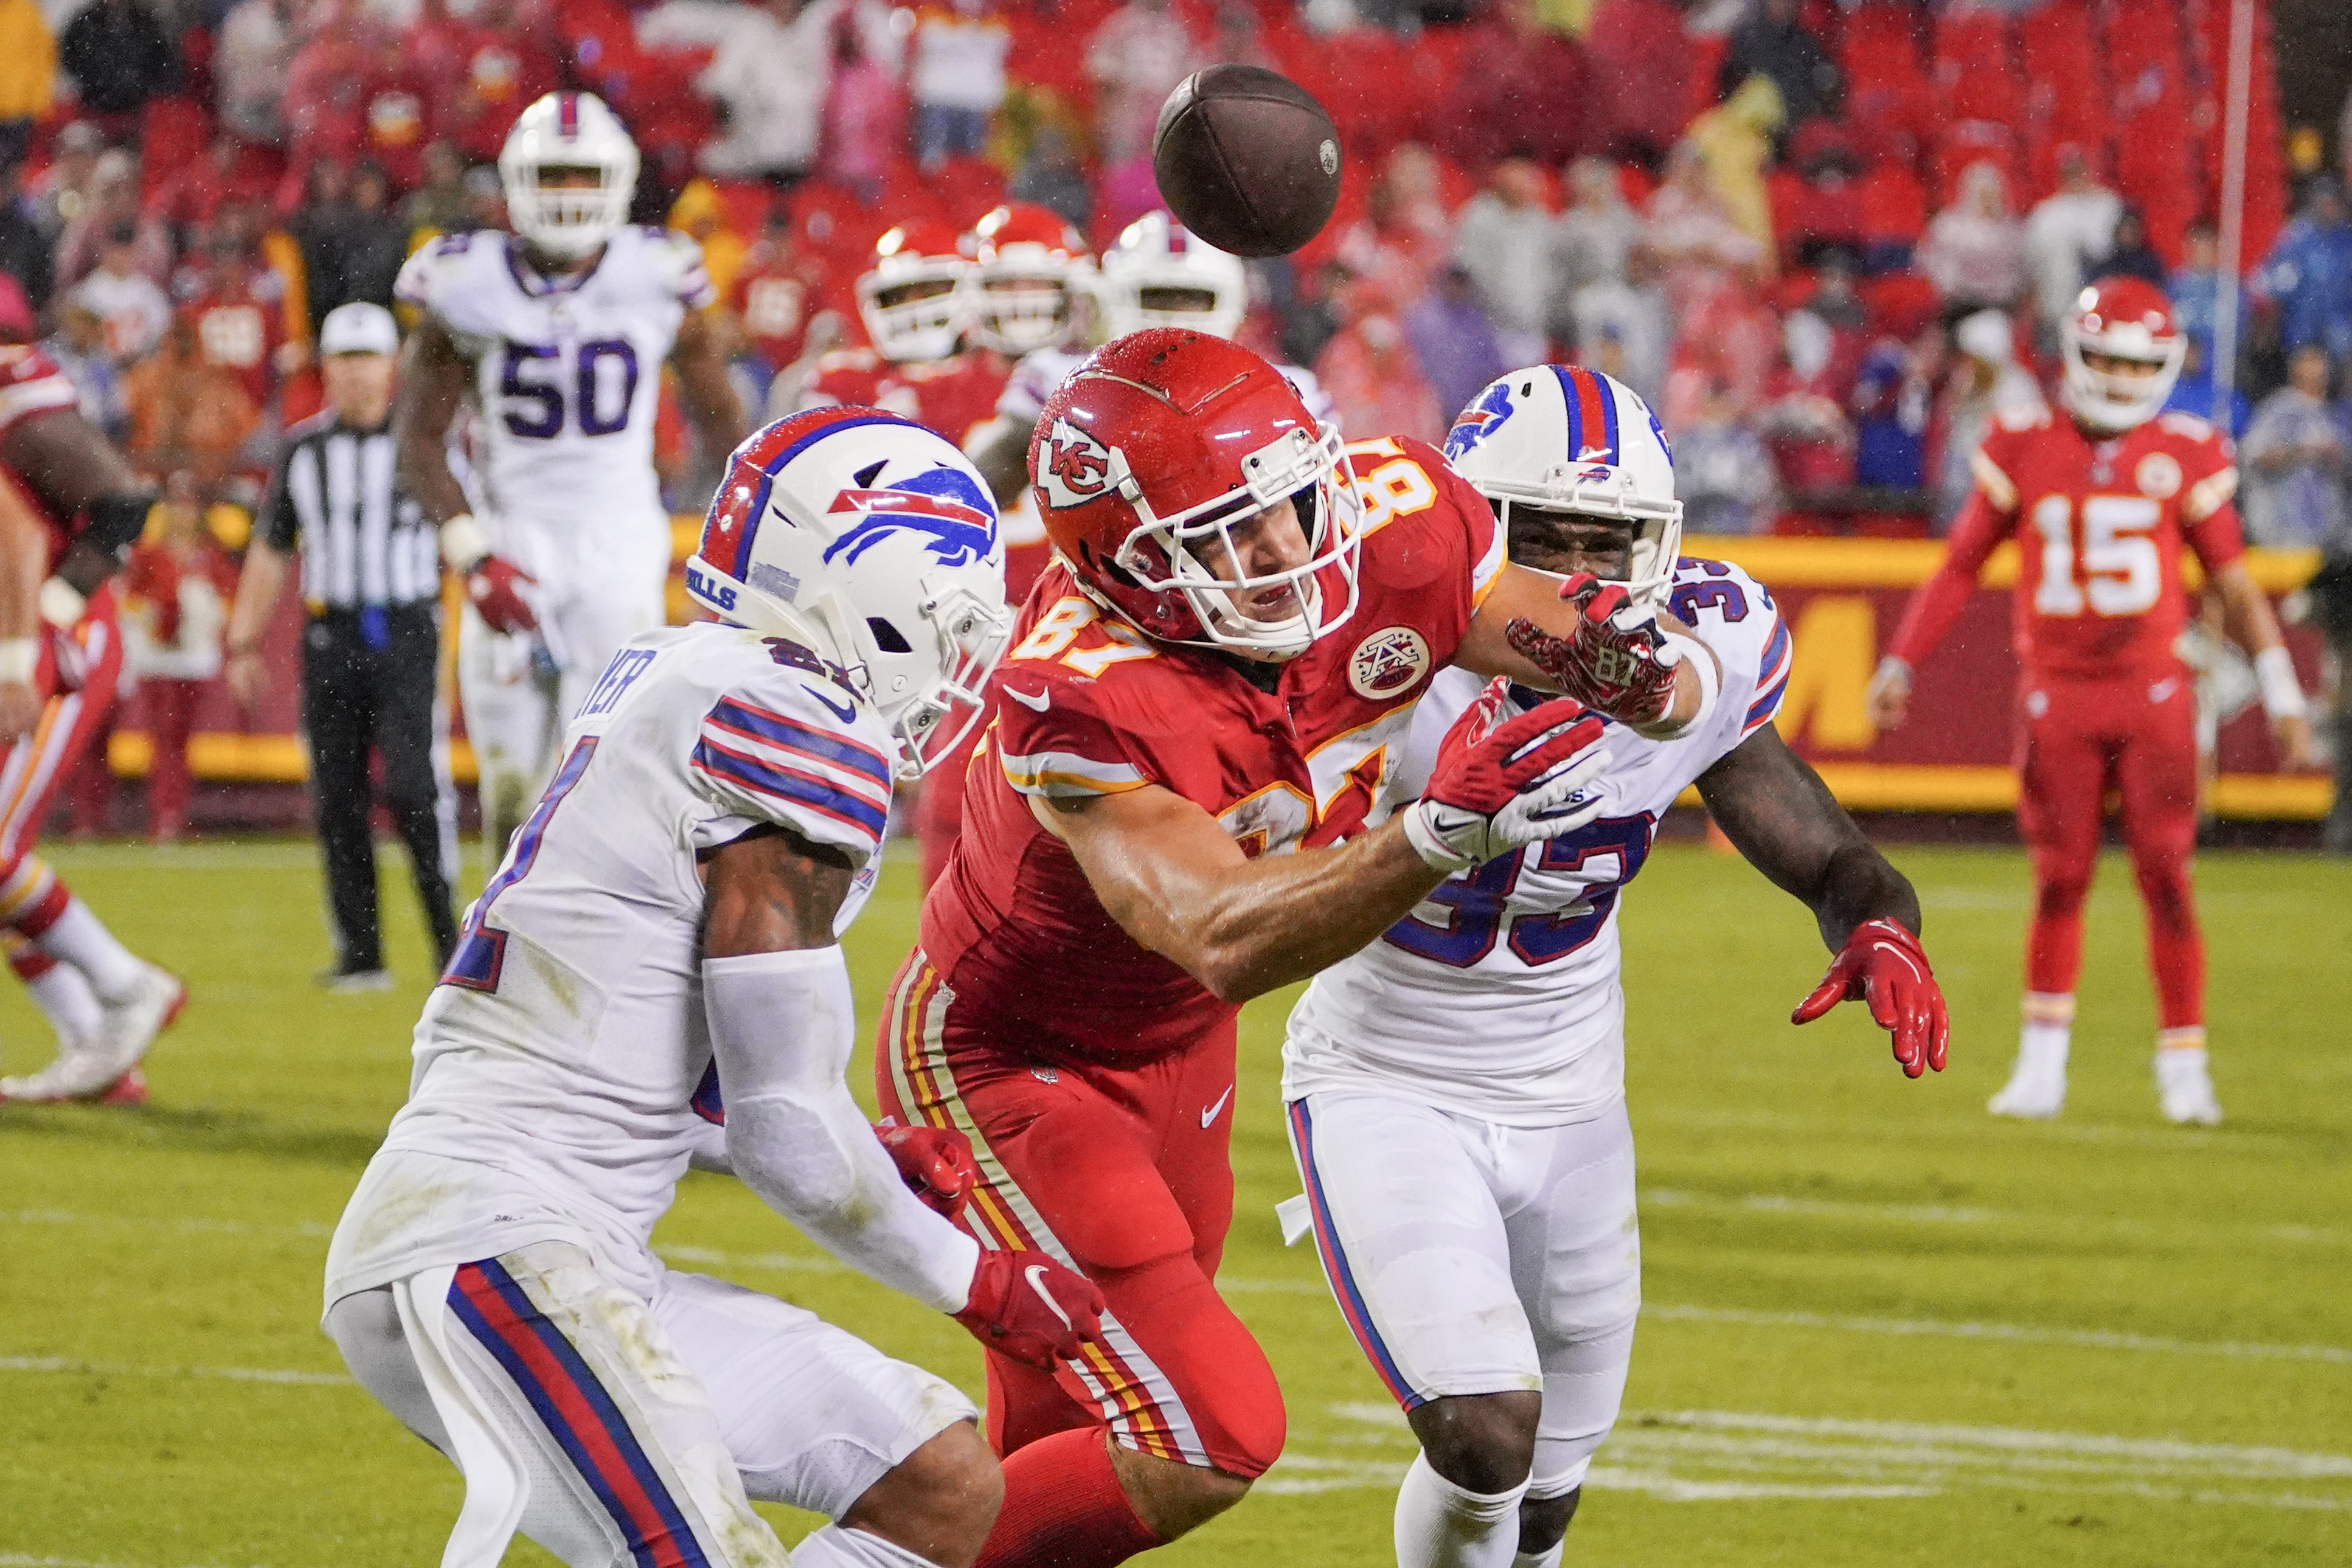 All our coverage: Bills vs Chiefs rematch in AFC Divisional round